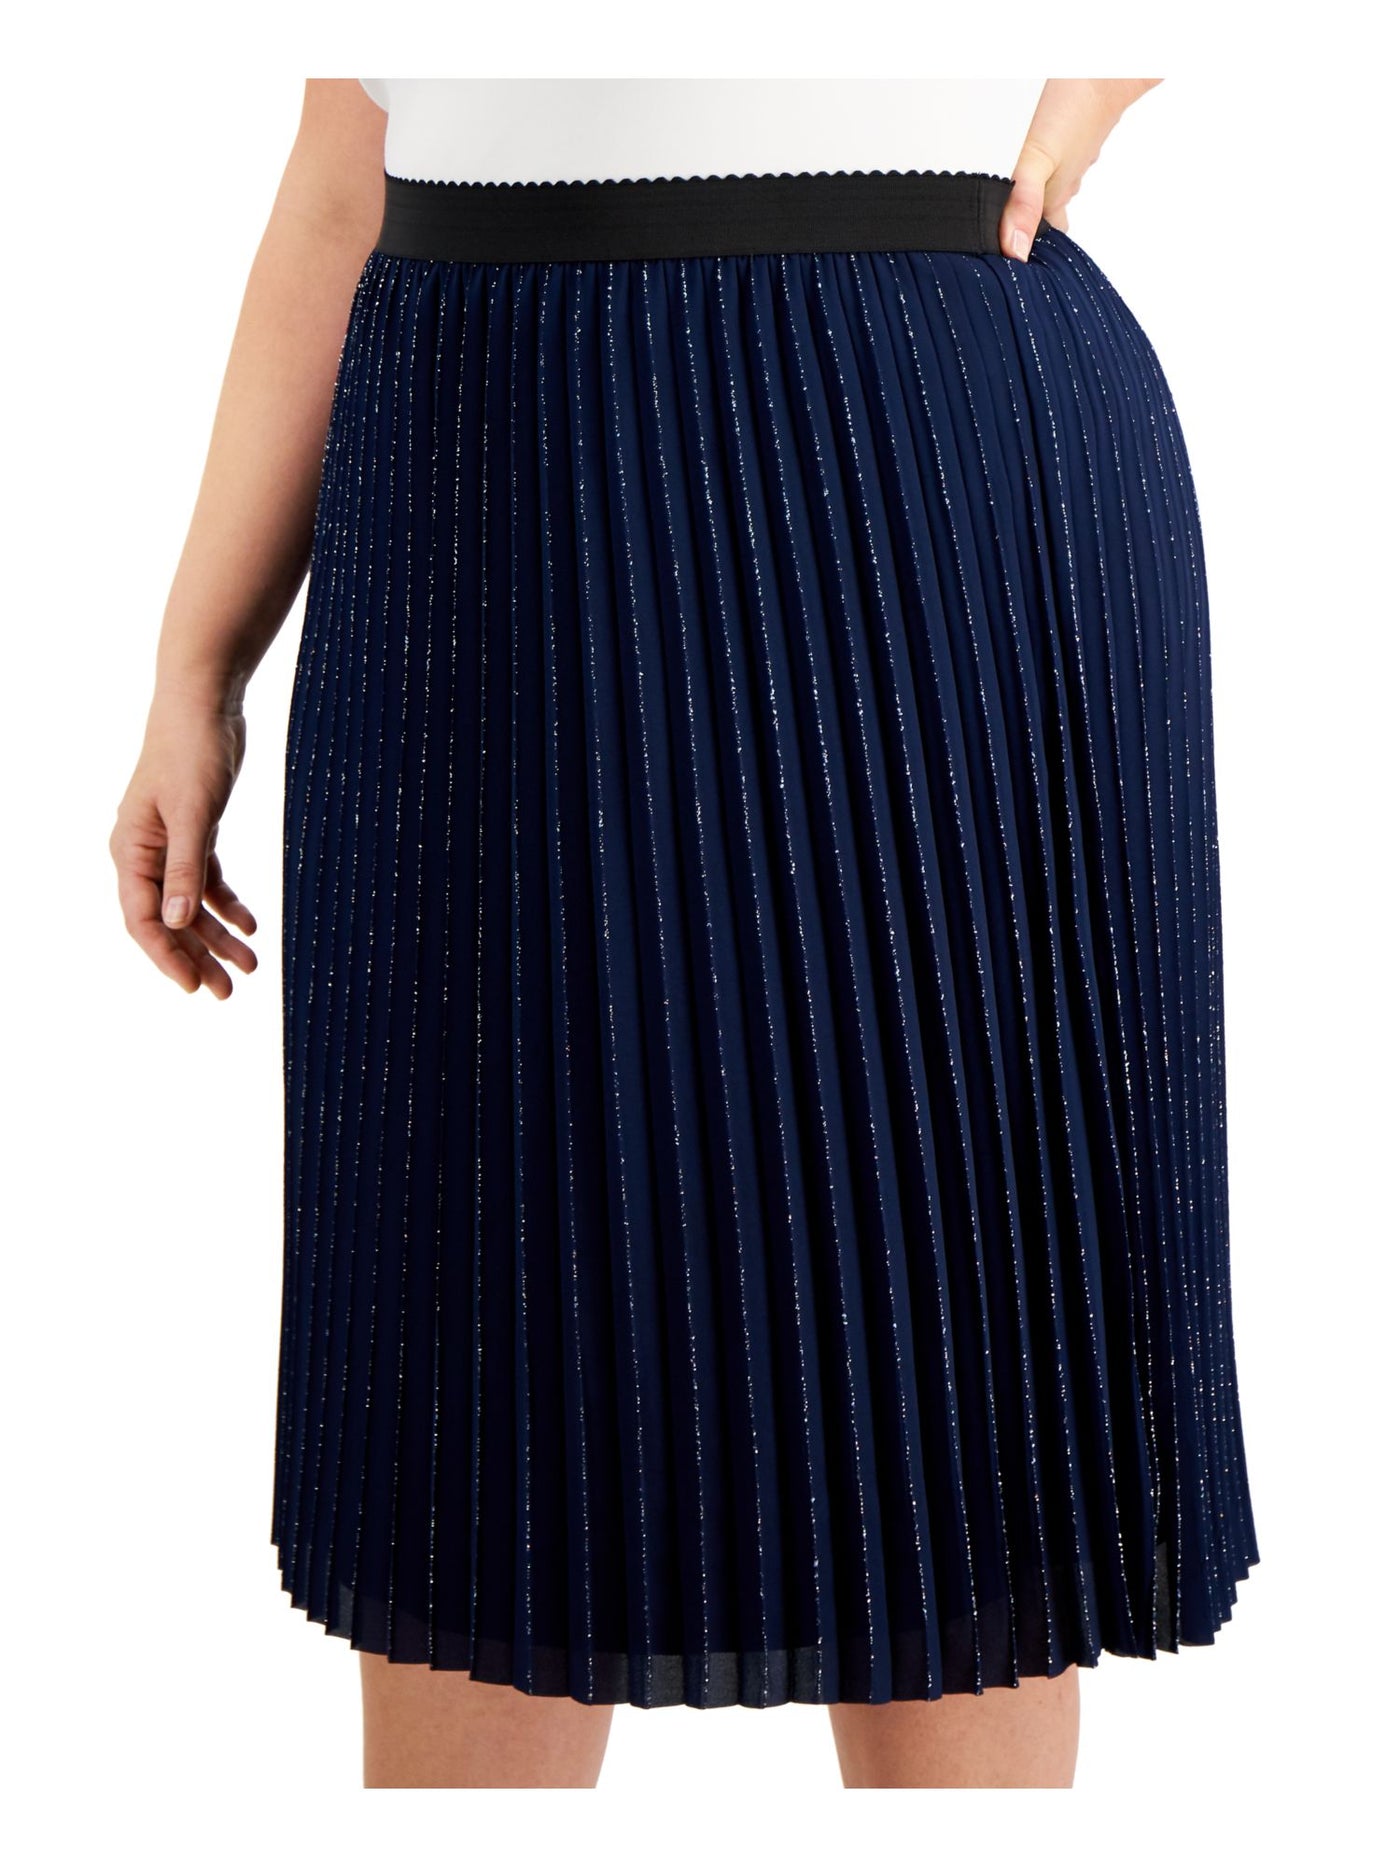 ADRIANNA PAPELL Womens Navy Metallic Pull On Styling Tea-Length Cocktail Pleated Skirt Plus 18W